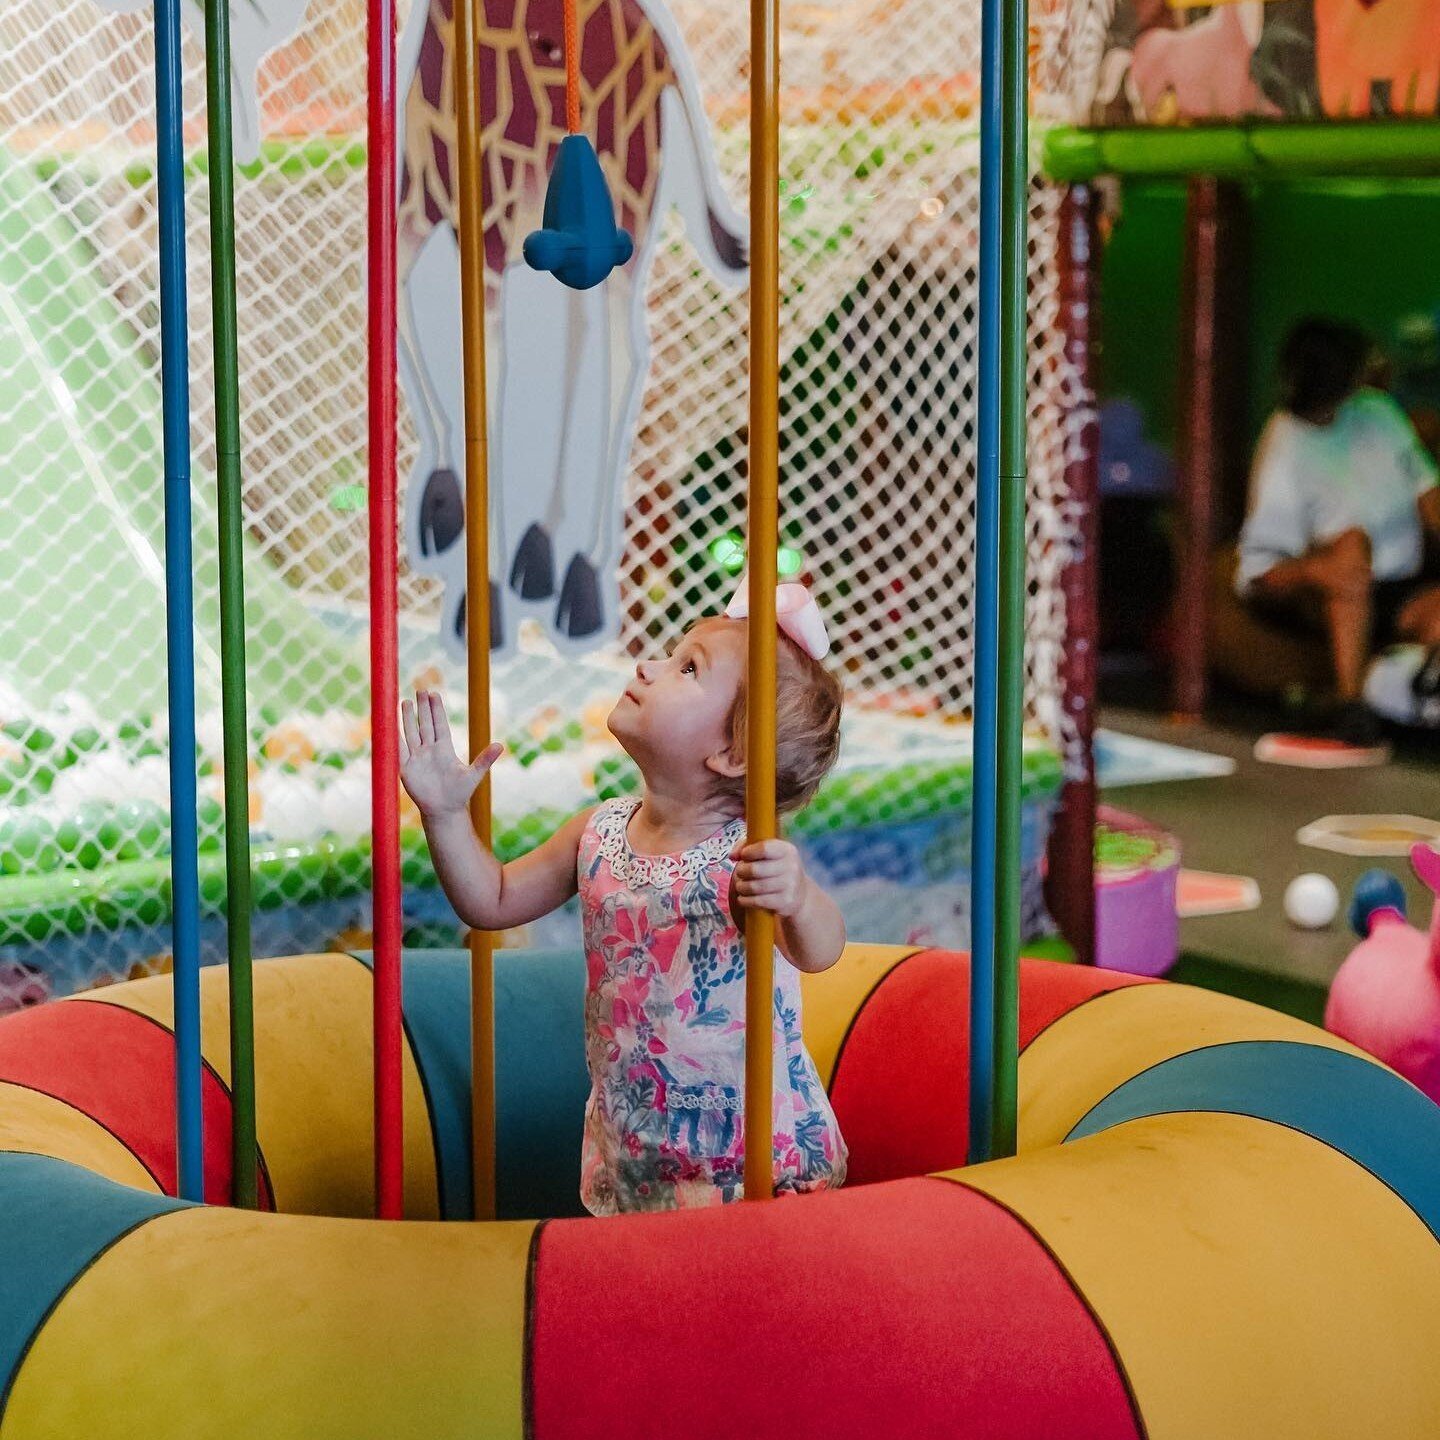 Don't miss another great week of @momcodebrentwood events as we gear up for our first activity and playgroup of the season!
.
TOMORROW, Monday, August 15: Indoor Playground at @tnkidsco in Nolensville 👧👦
.
Thursday, August 18: Playgroup at a member